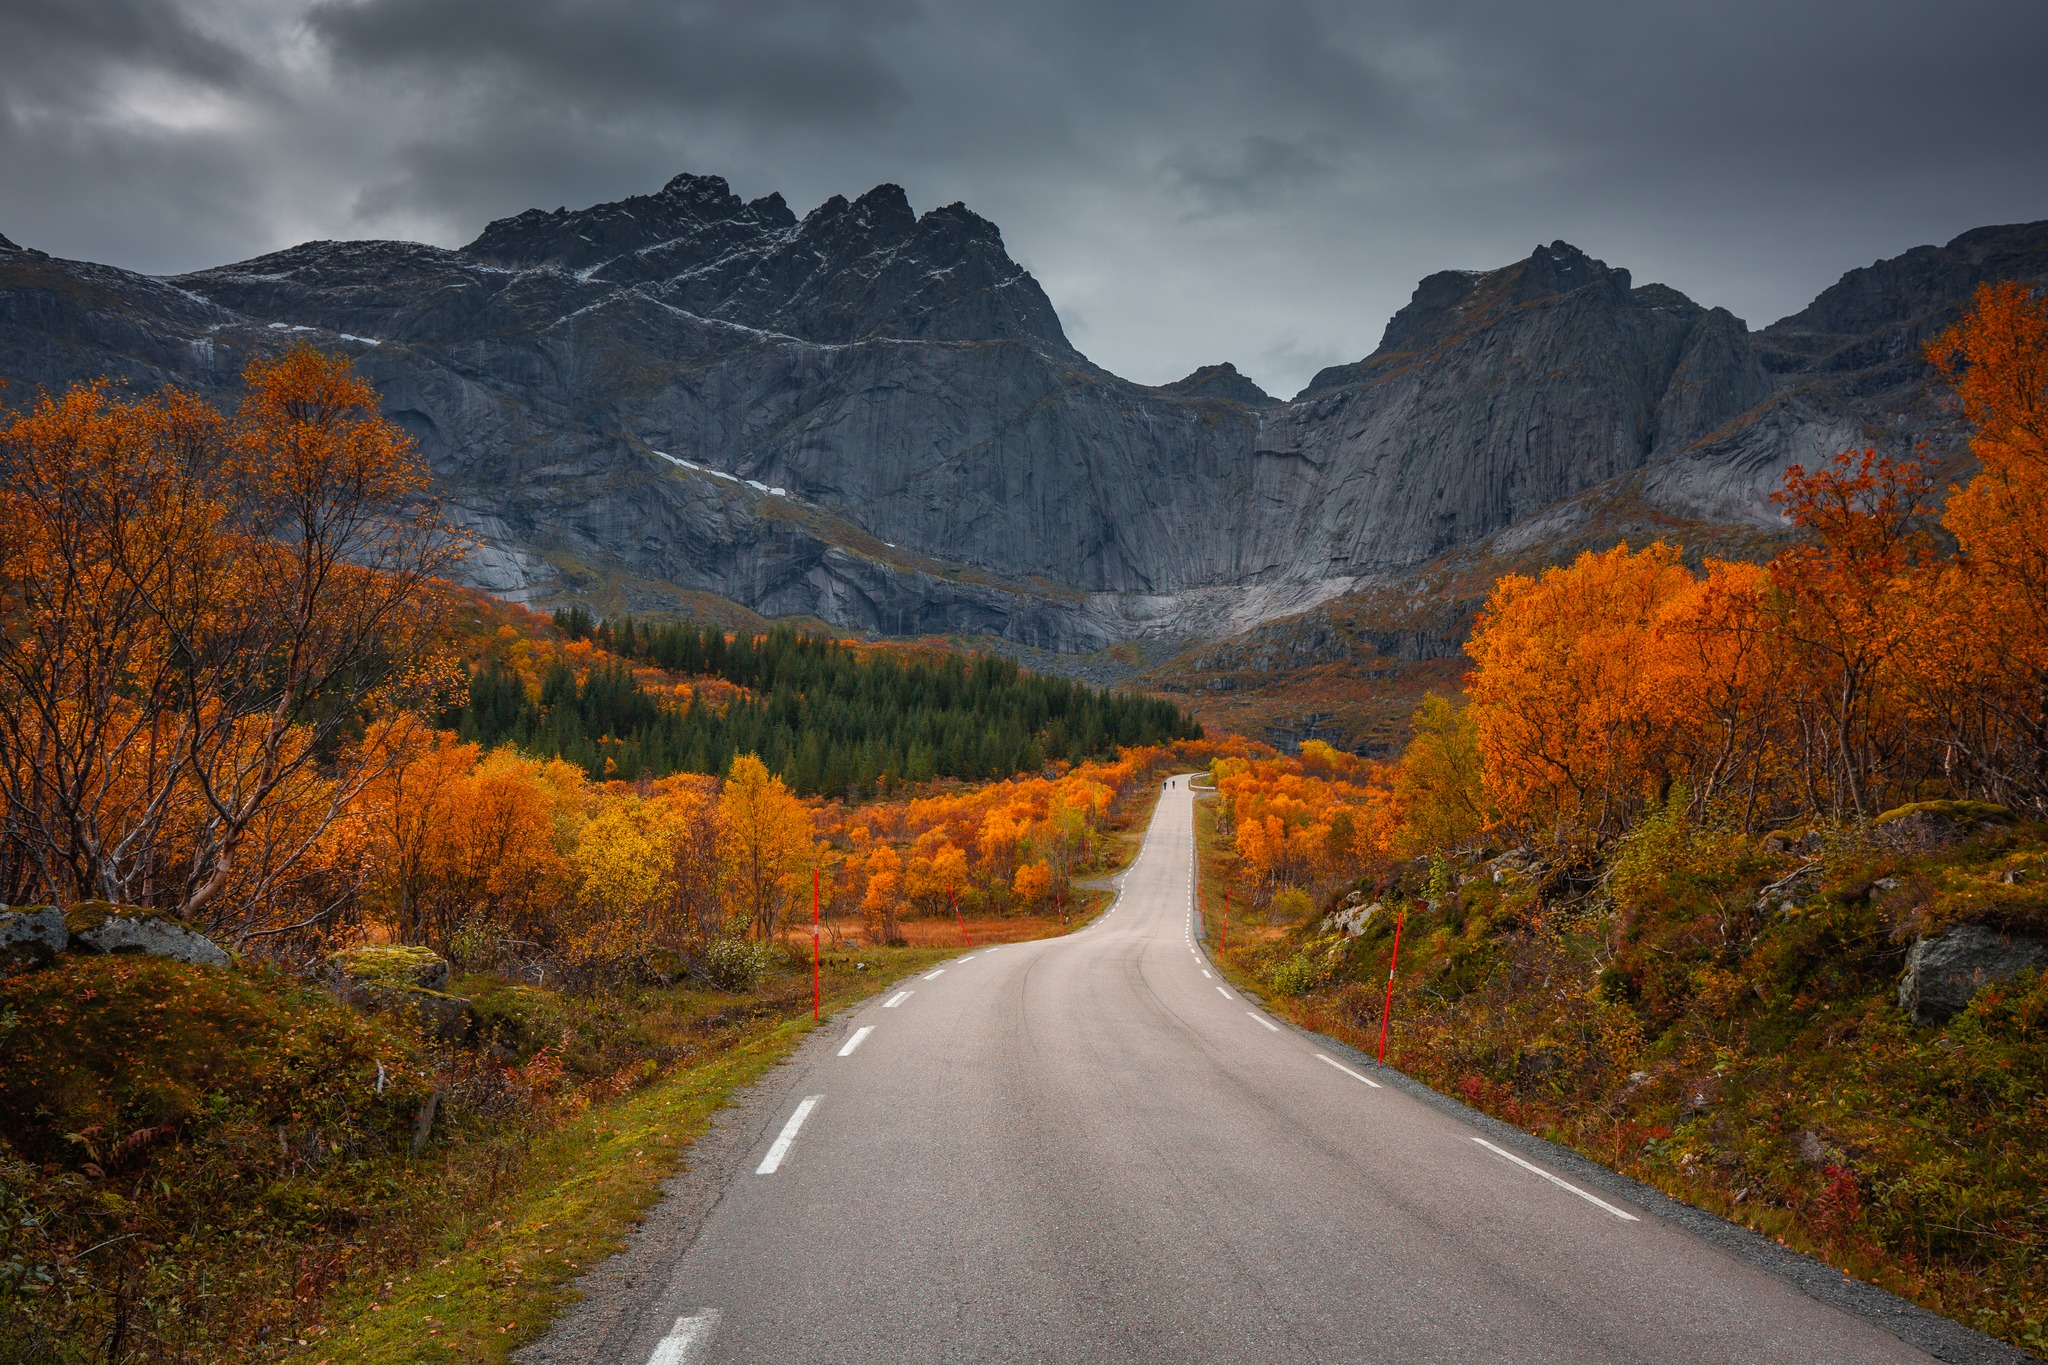 When driving in Lofoten do not just stop in the middle of the road to take a picture.